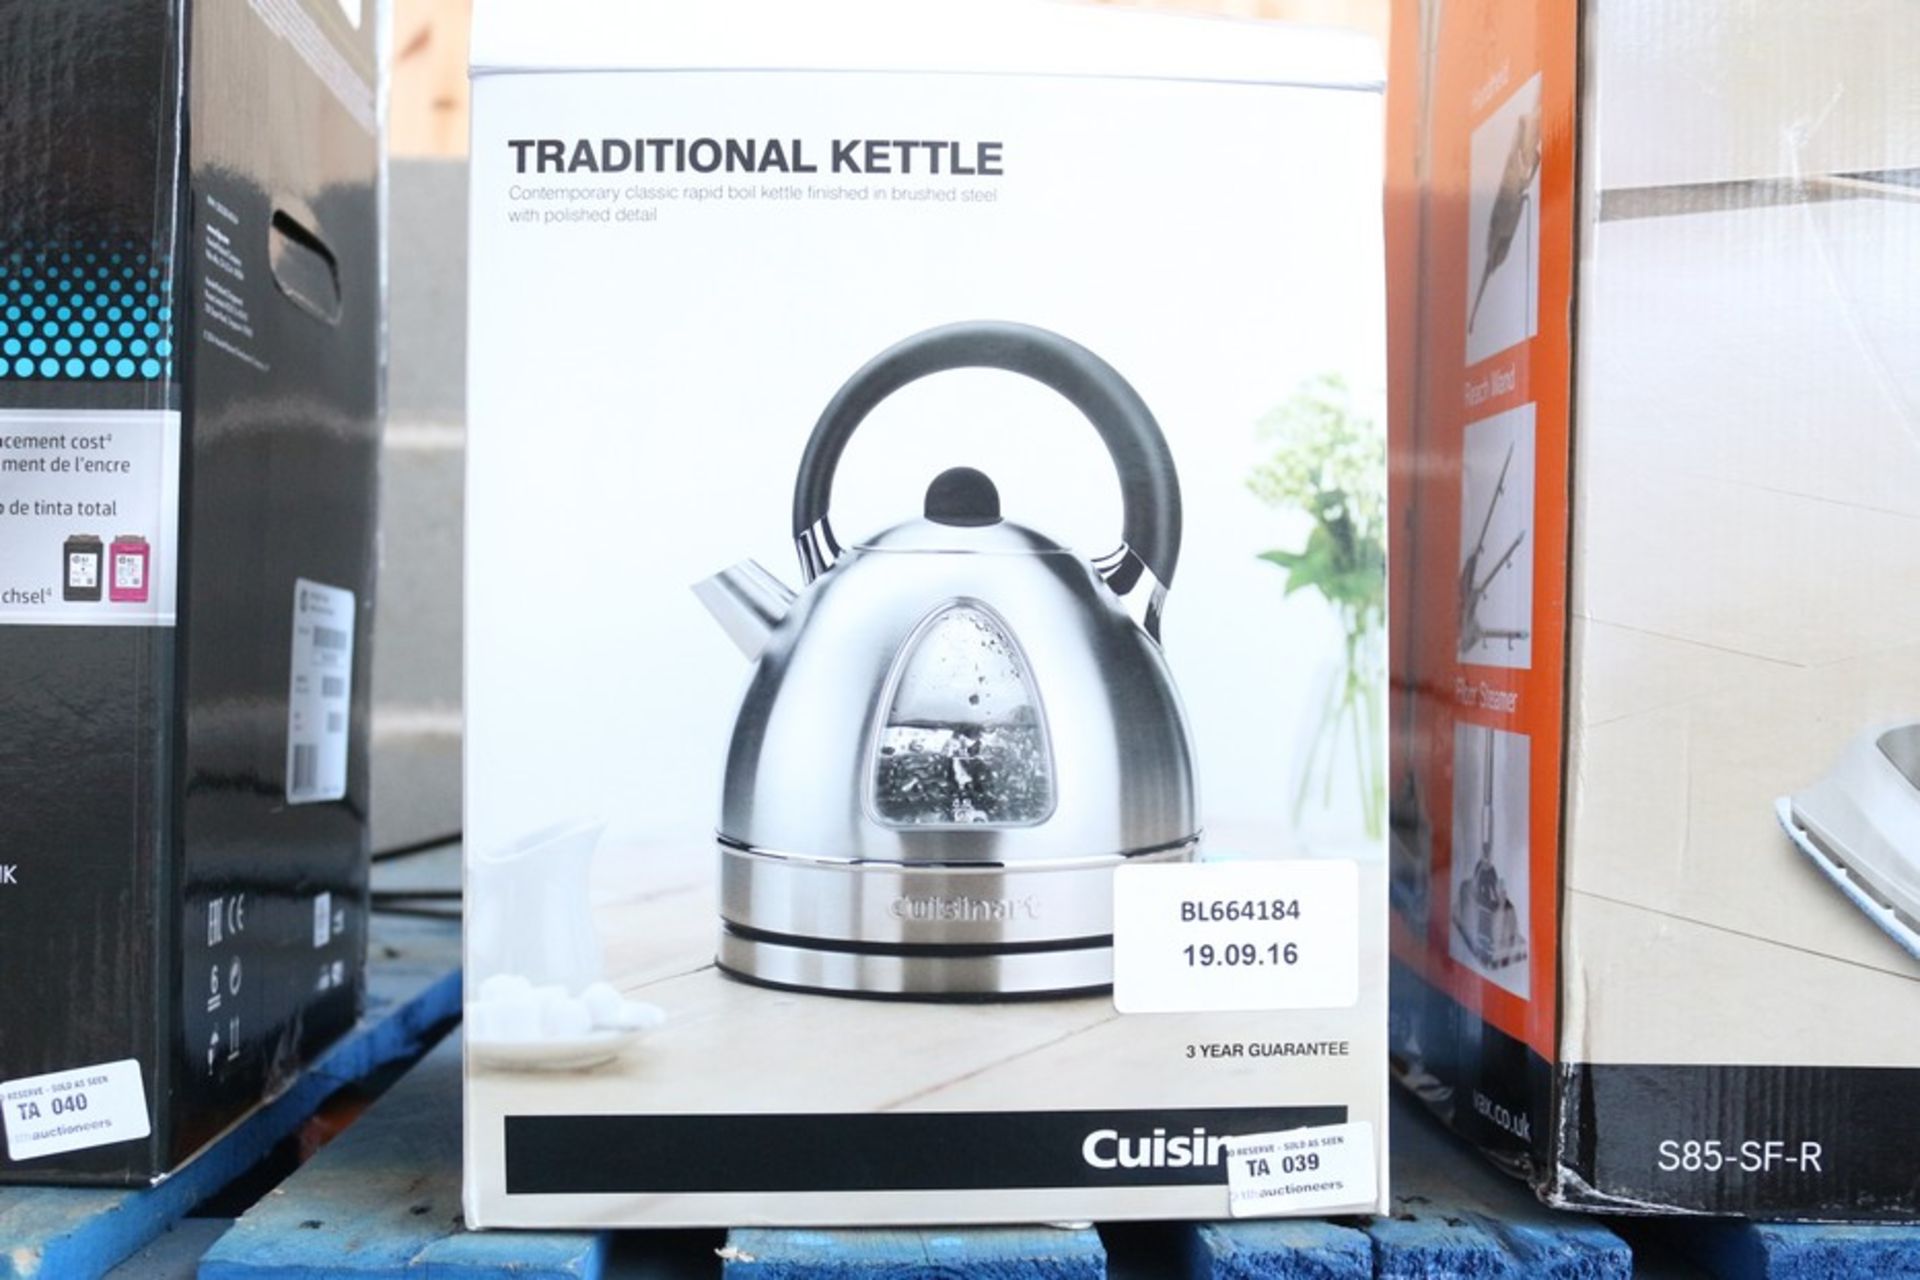 1X BOXED CUSINART TRADITIONAL KETTLE RRP £80 (BL664184)